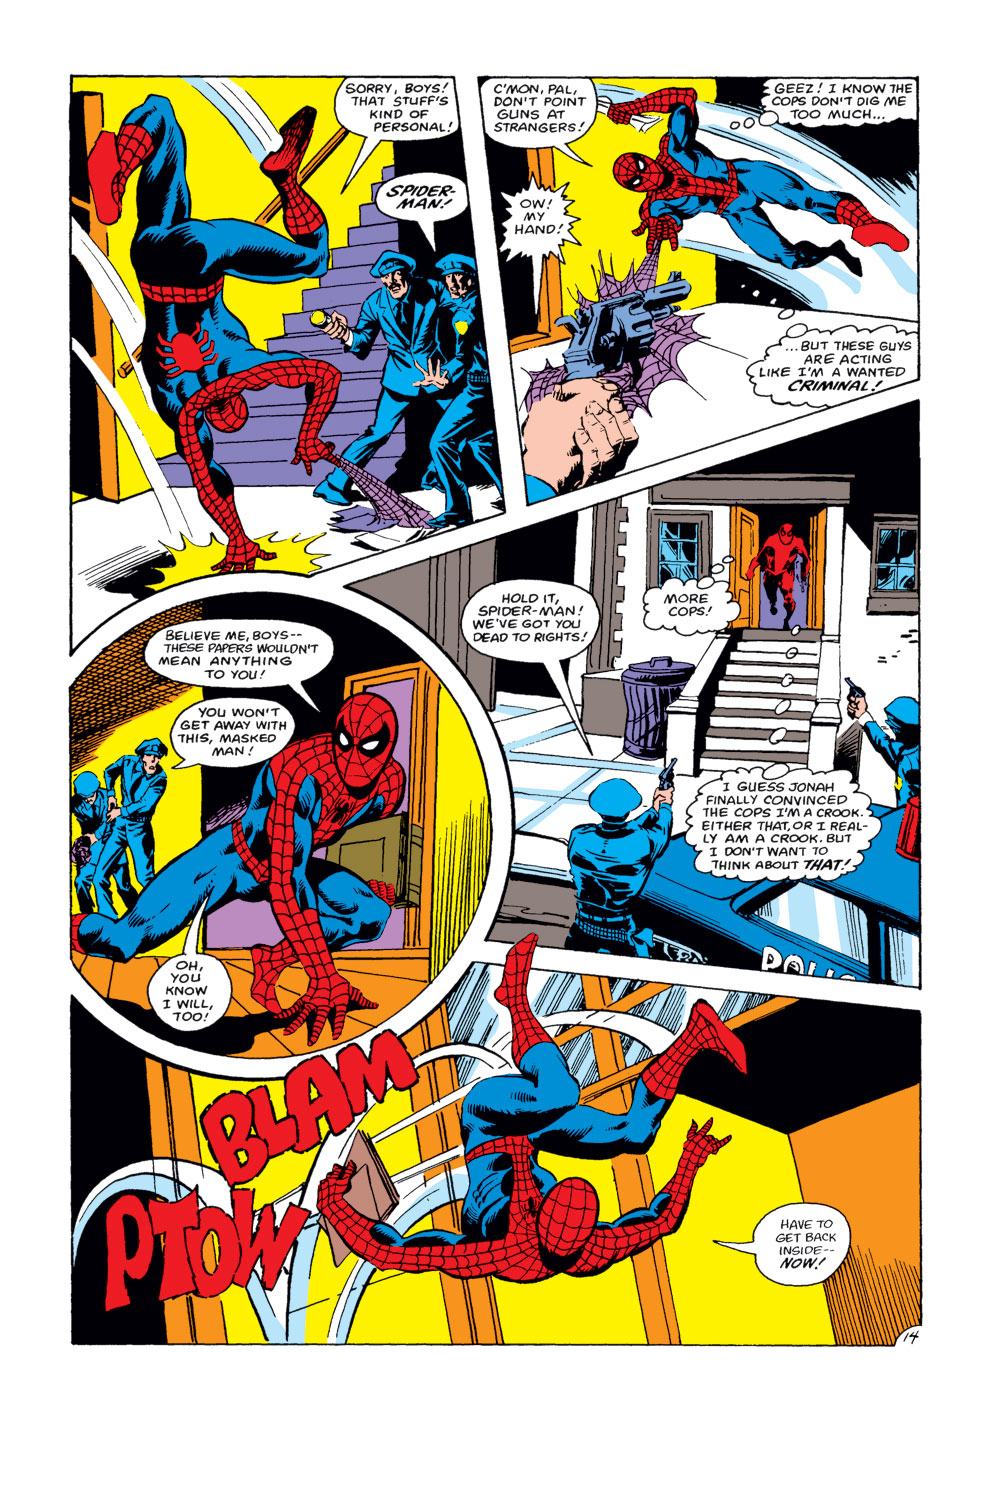 What If? (1977) issue 30 - Spider-Man's clone lived - Page 15